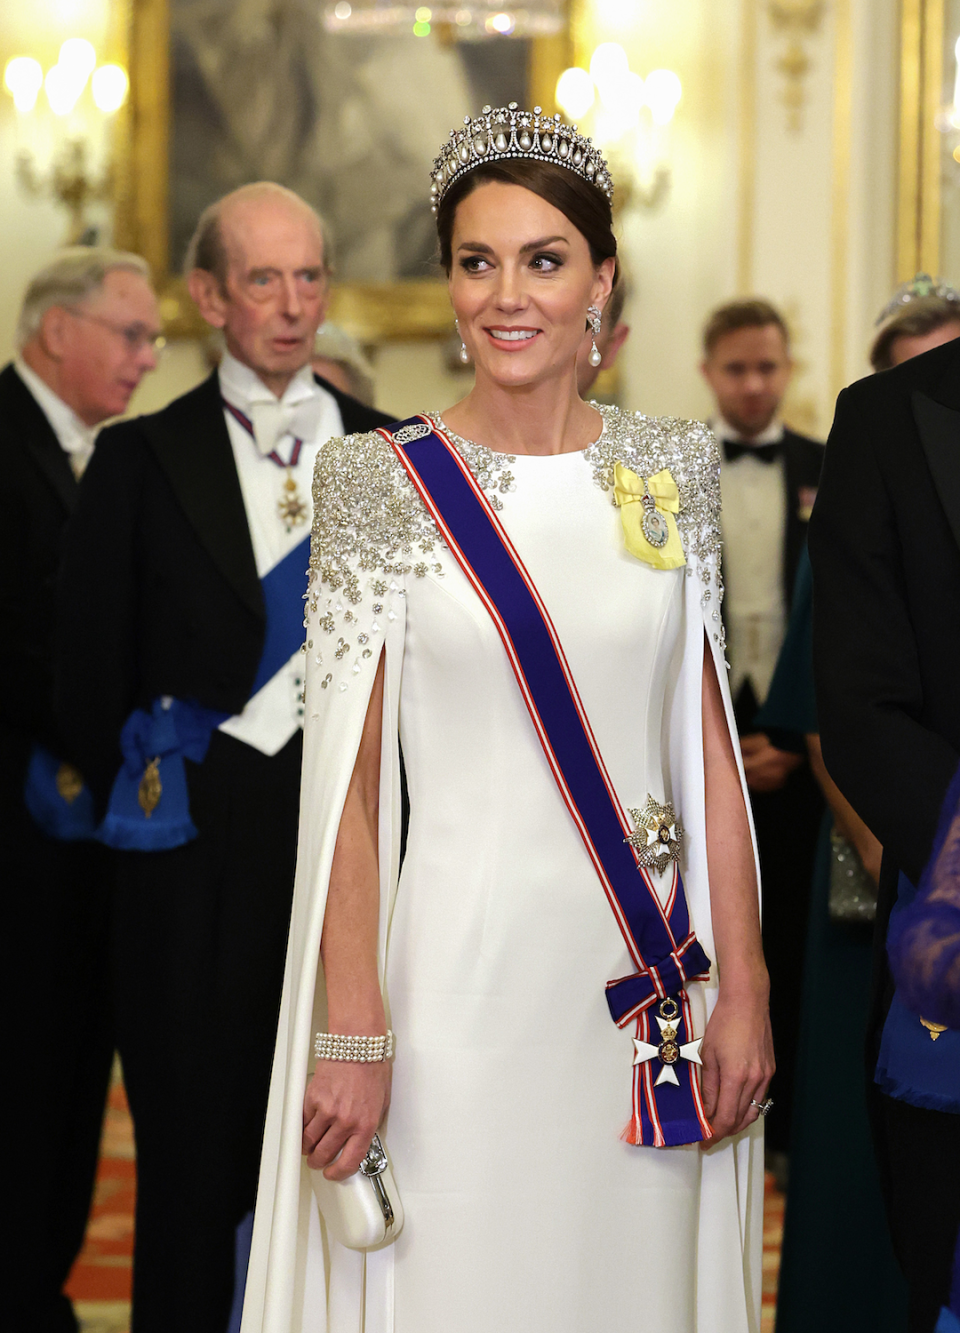 <p> The South African state banquet at Buckingham Palace in 2022 marked nearly three years without the duchess wearing a tiara. For the important occasion, she wore her favourite Lover's Knot Tiara - which was originally made by her husband Prince William's great-great-grandmother Queen Mary in 1913 from another tiara. </p>